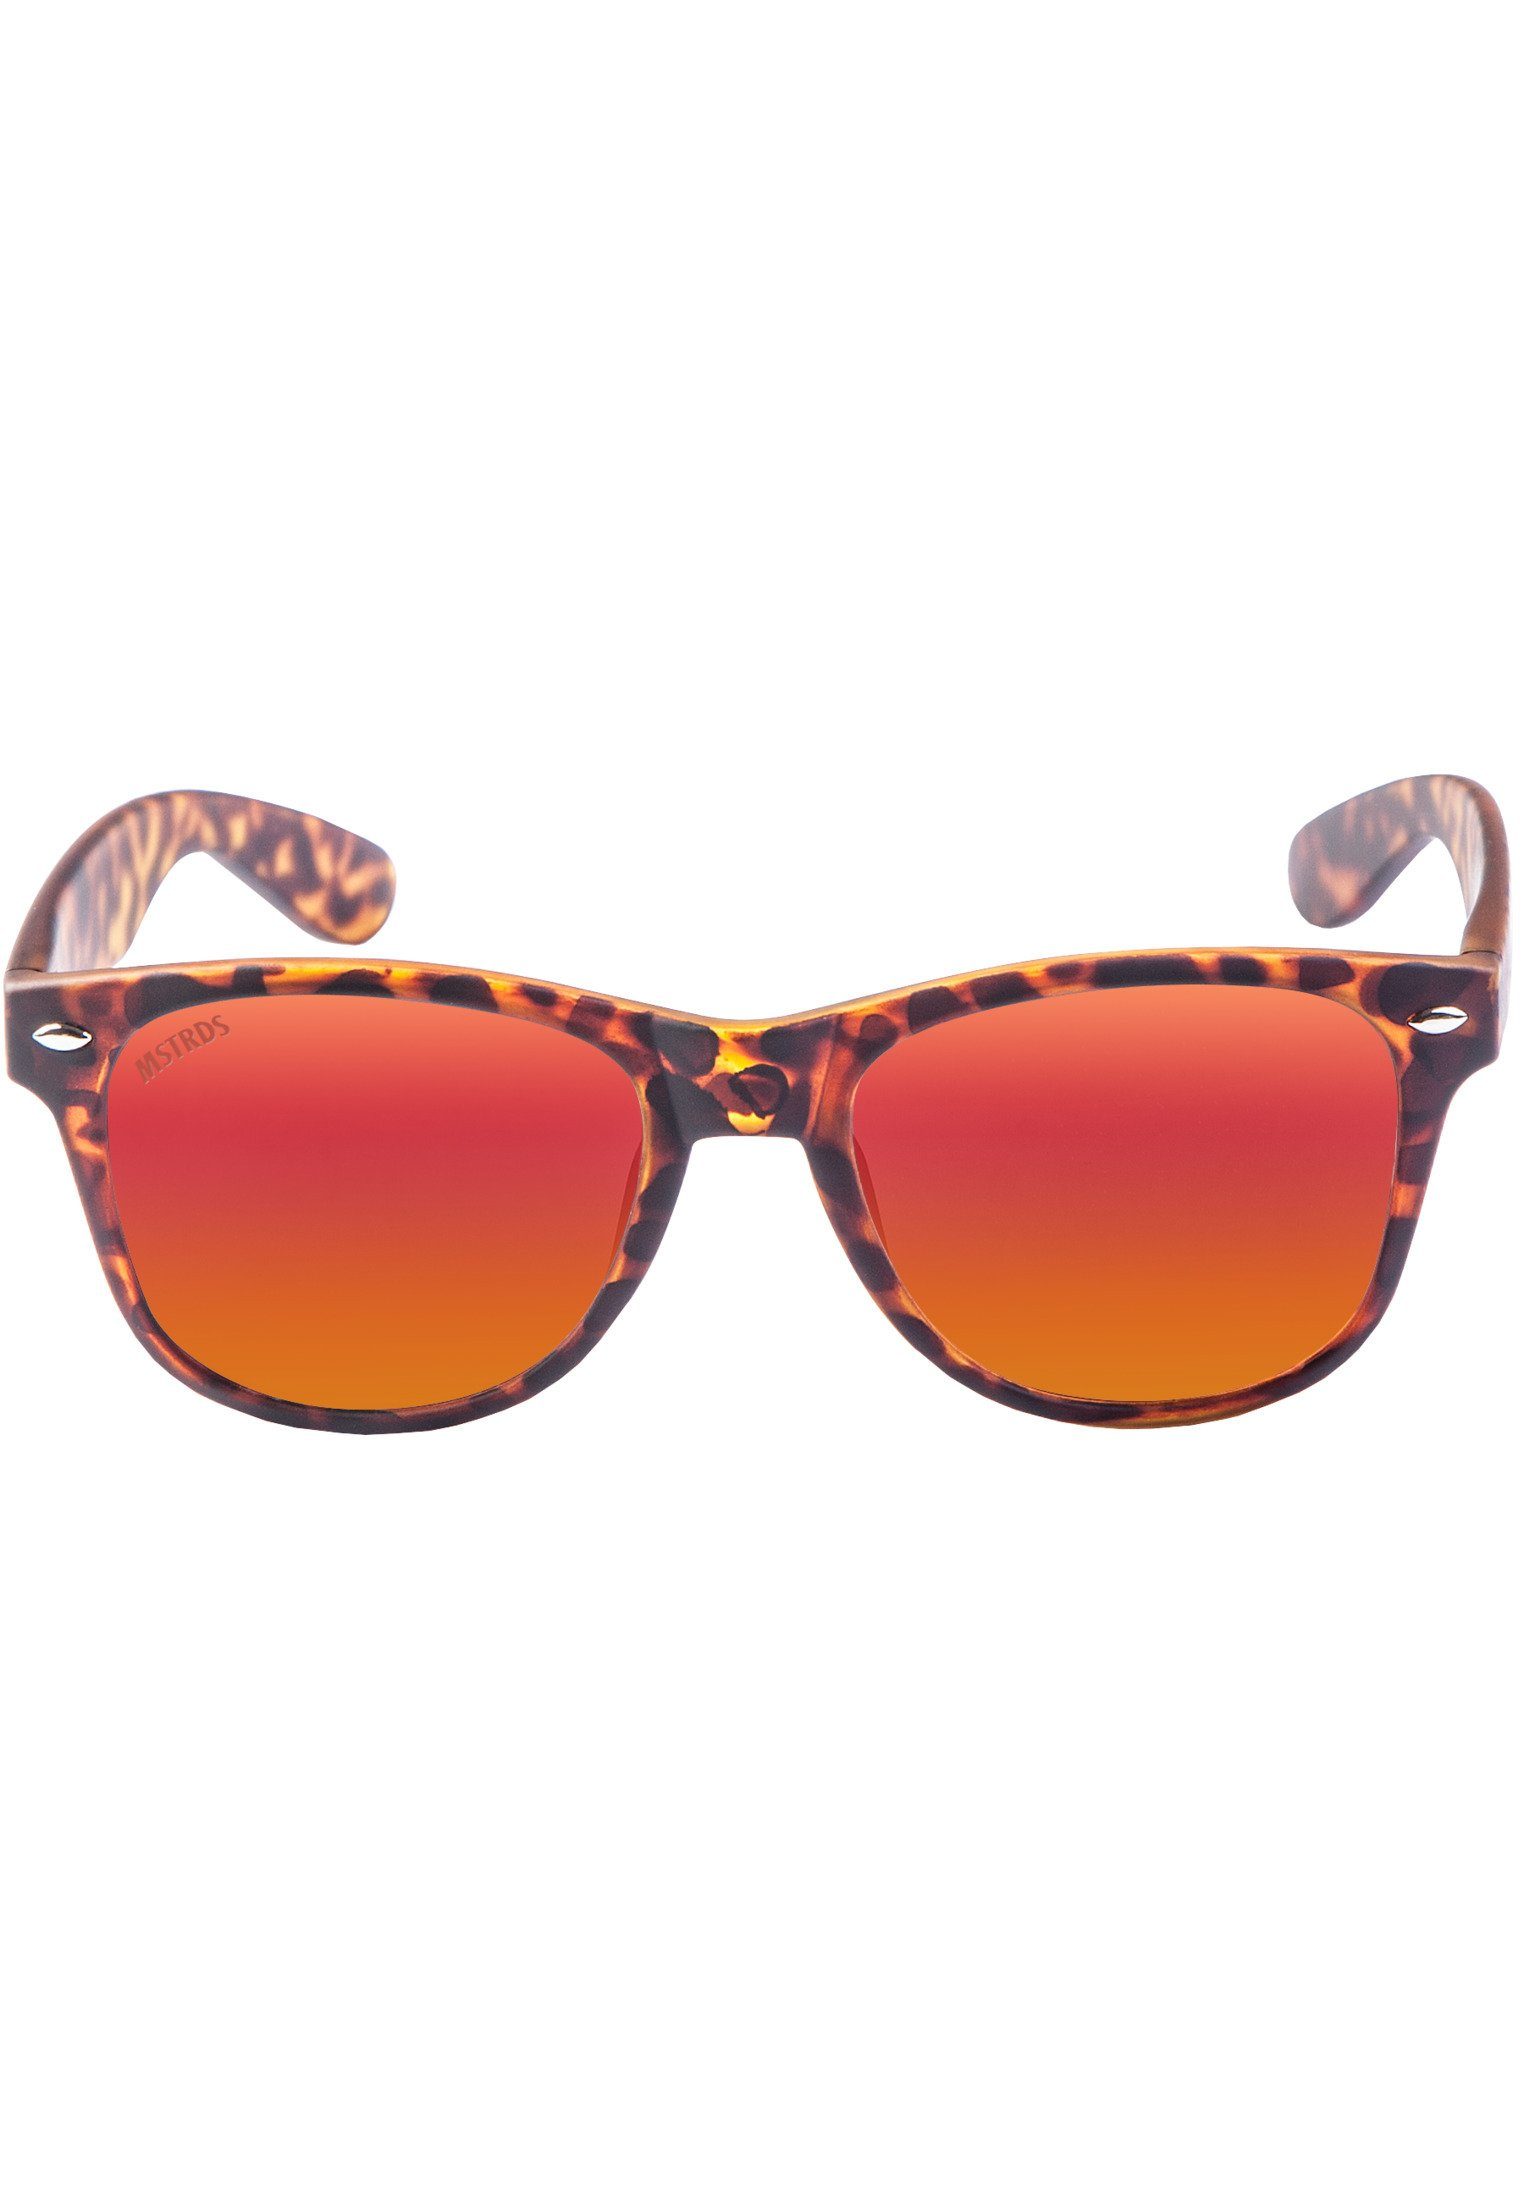 MSTRDS Sonnenbrille Accessoires Sunglasses Likoma Youth havanna/red